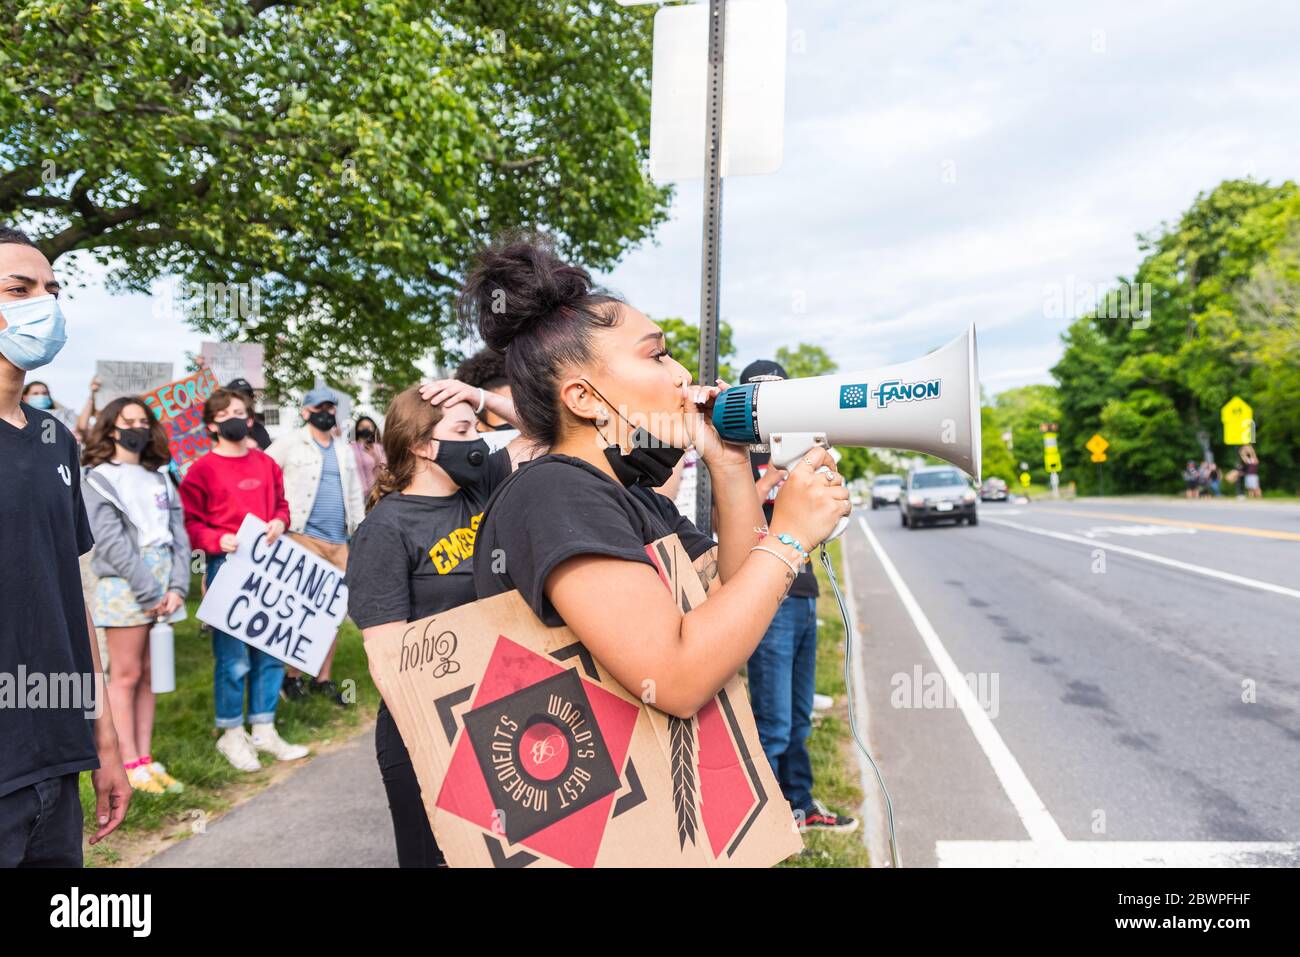 Sudbury, Massachusetts. 2nd June, 2020. A large group of people held an organized Black Lives Matter rally in the center of town. Stock Photo